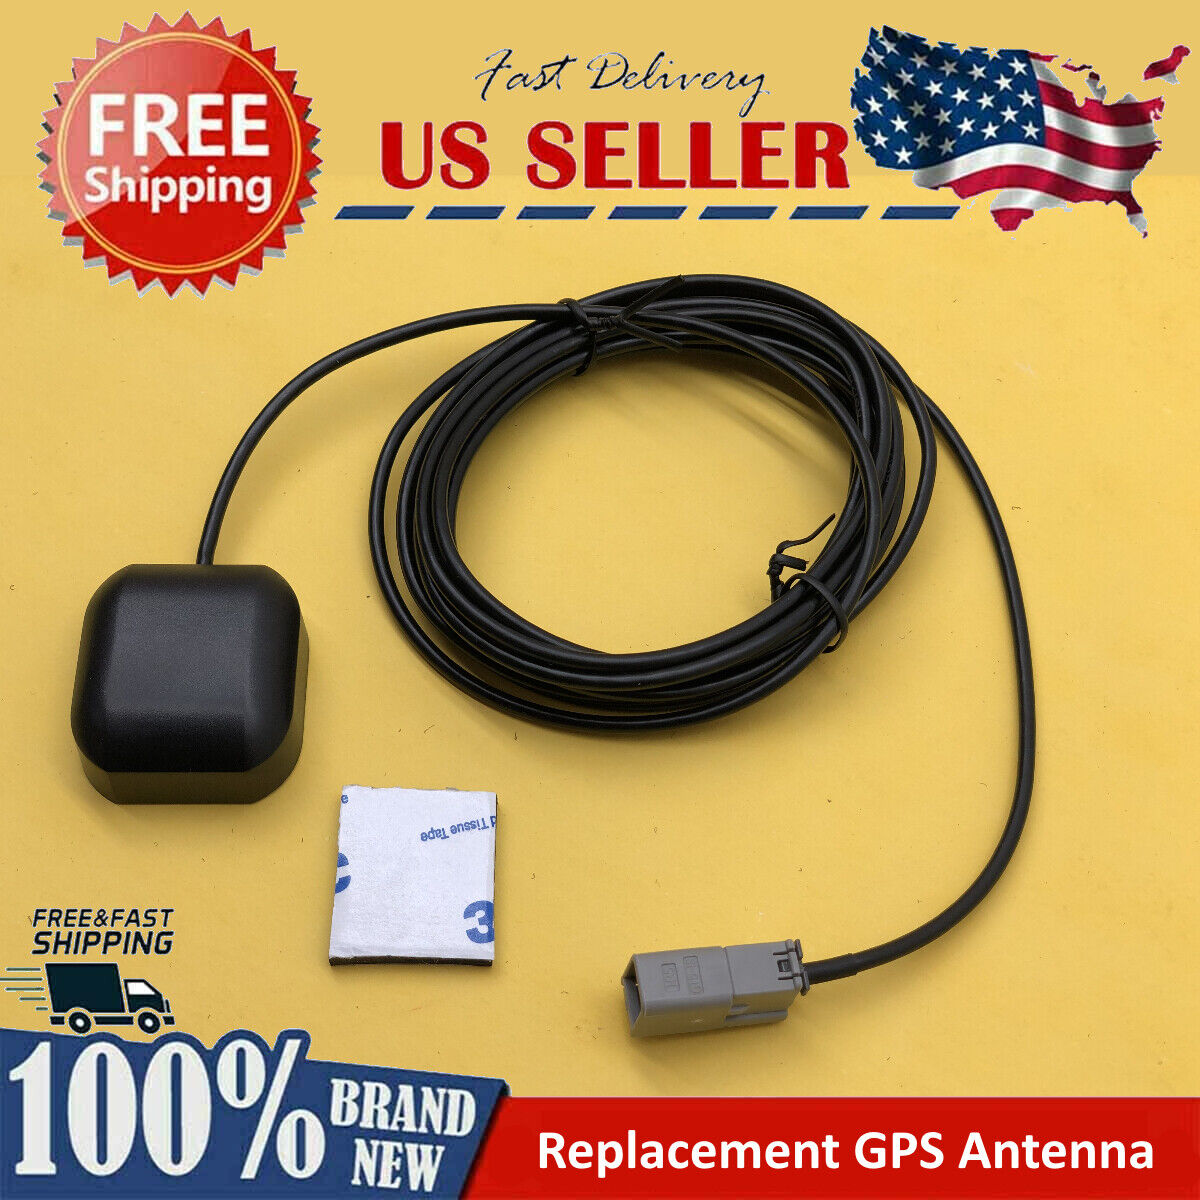 NEW GPS ANTENNA FOR KENWOOD DNX694S DNX-694S REPLACEMENT